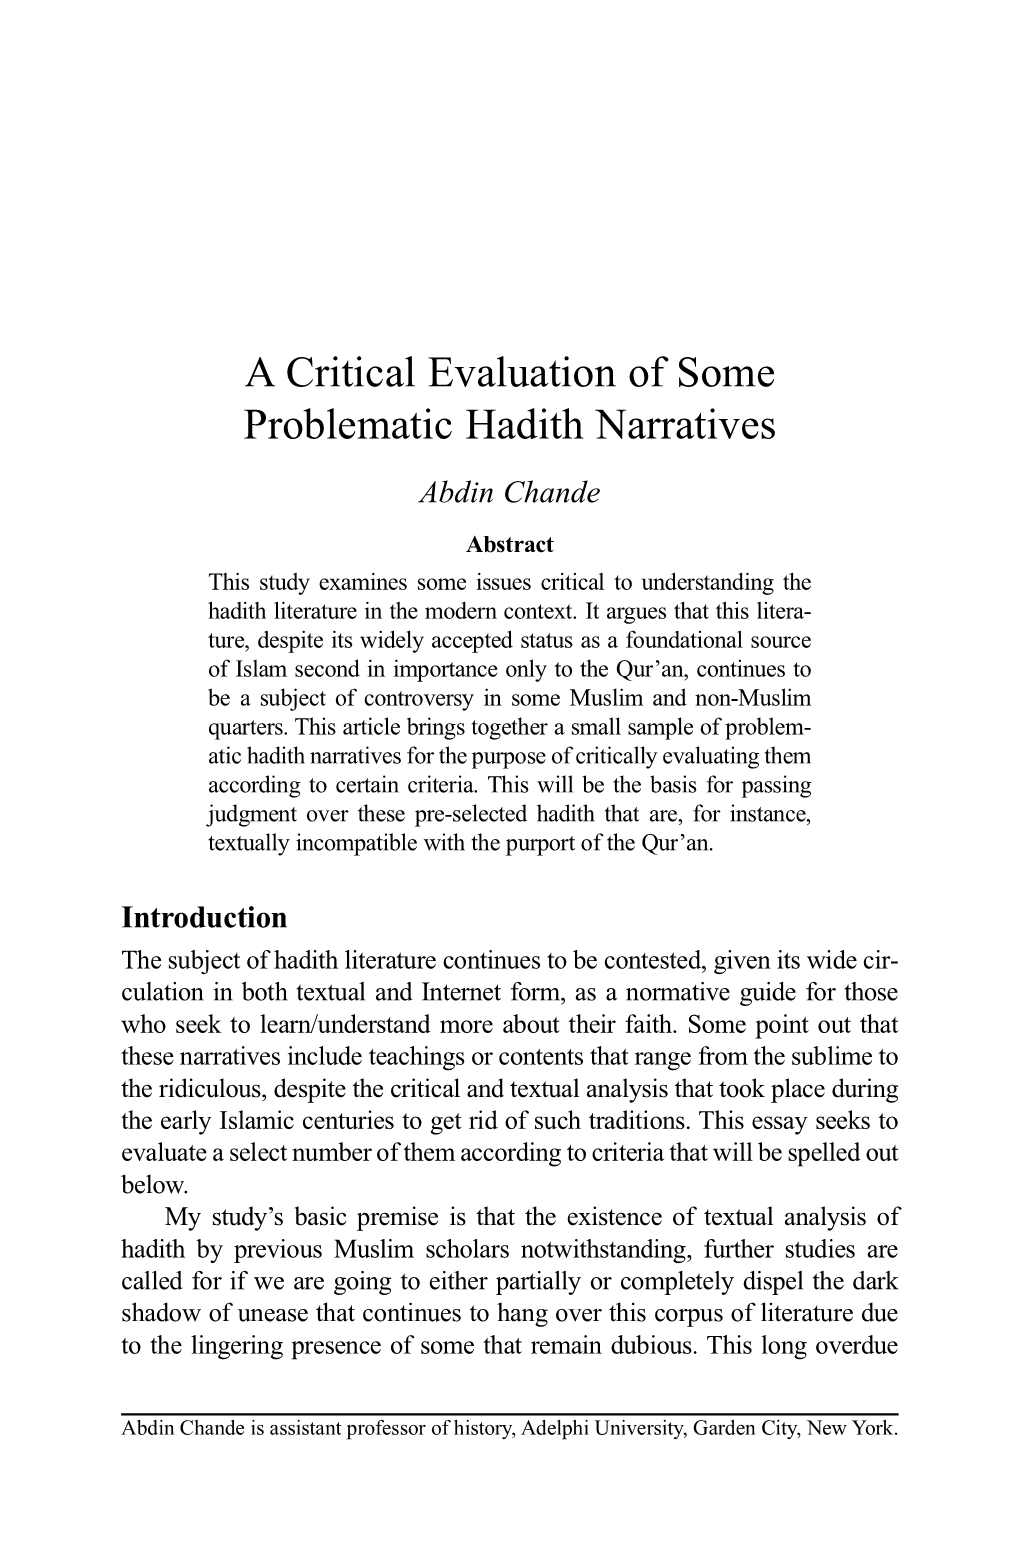 A Critical Evaluation of Some Problematic Hadith Narratives